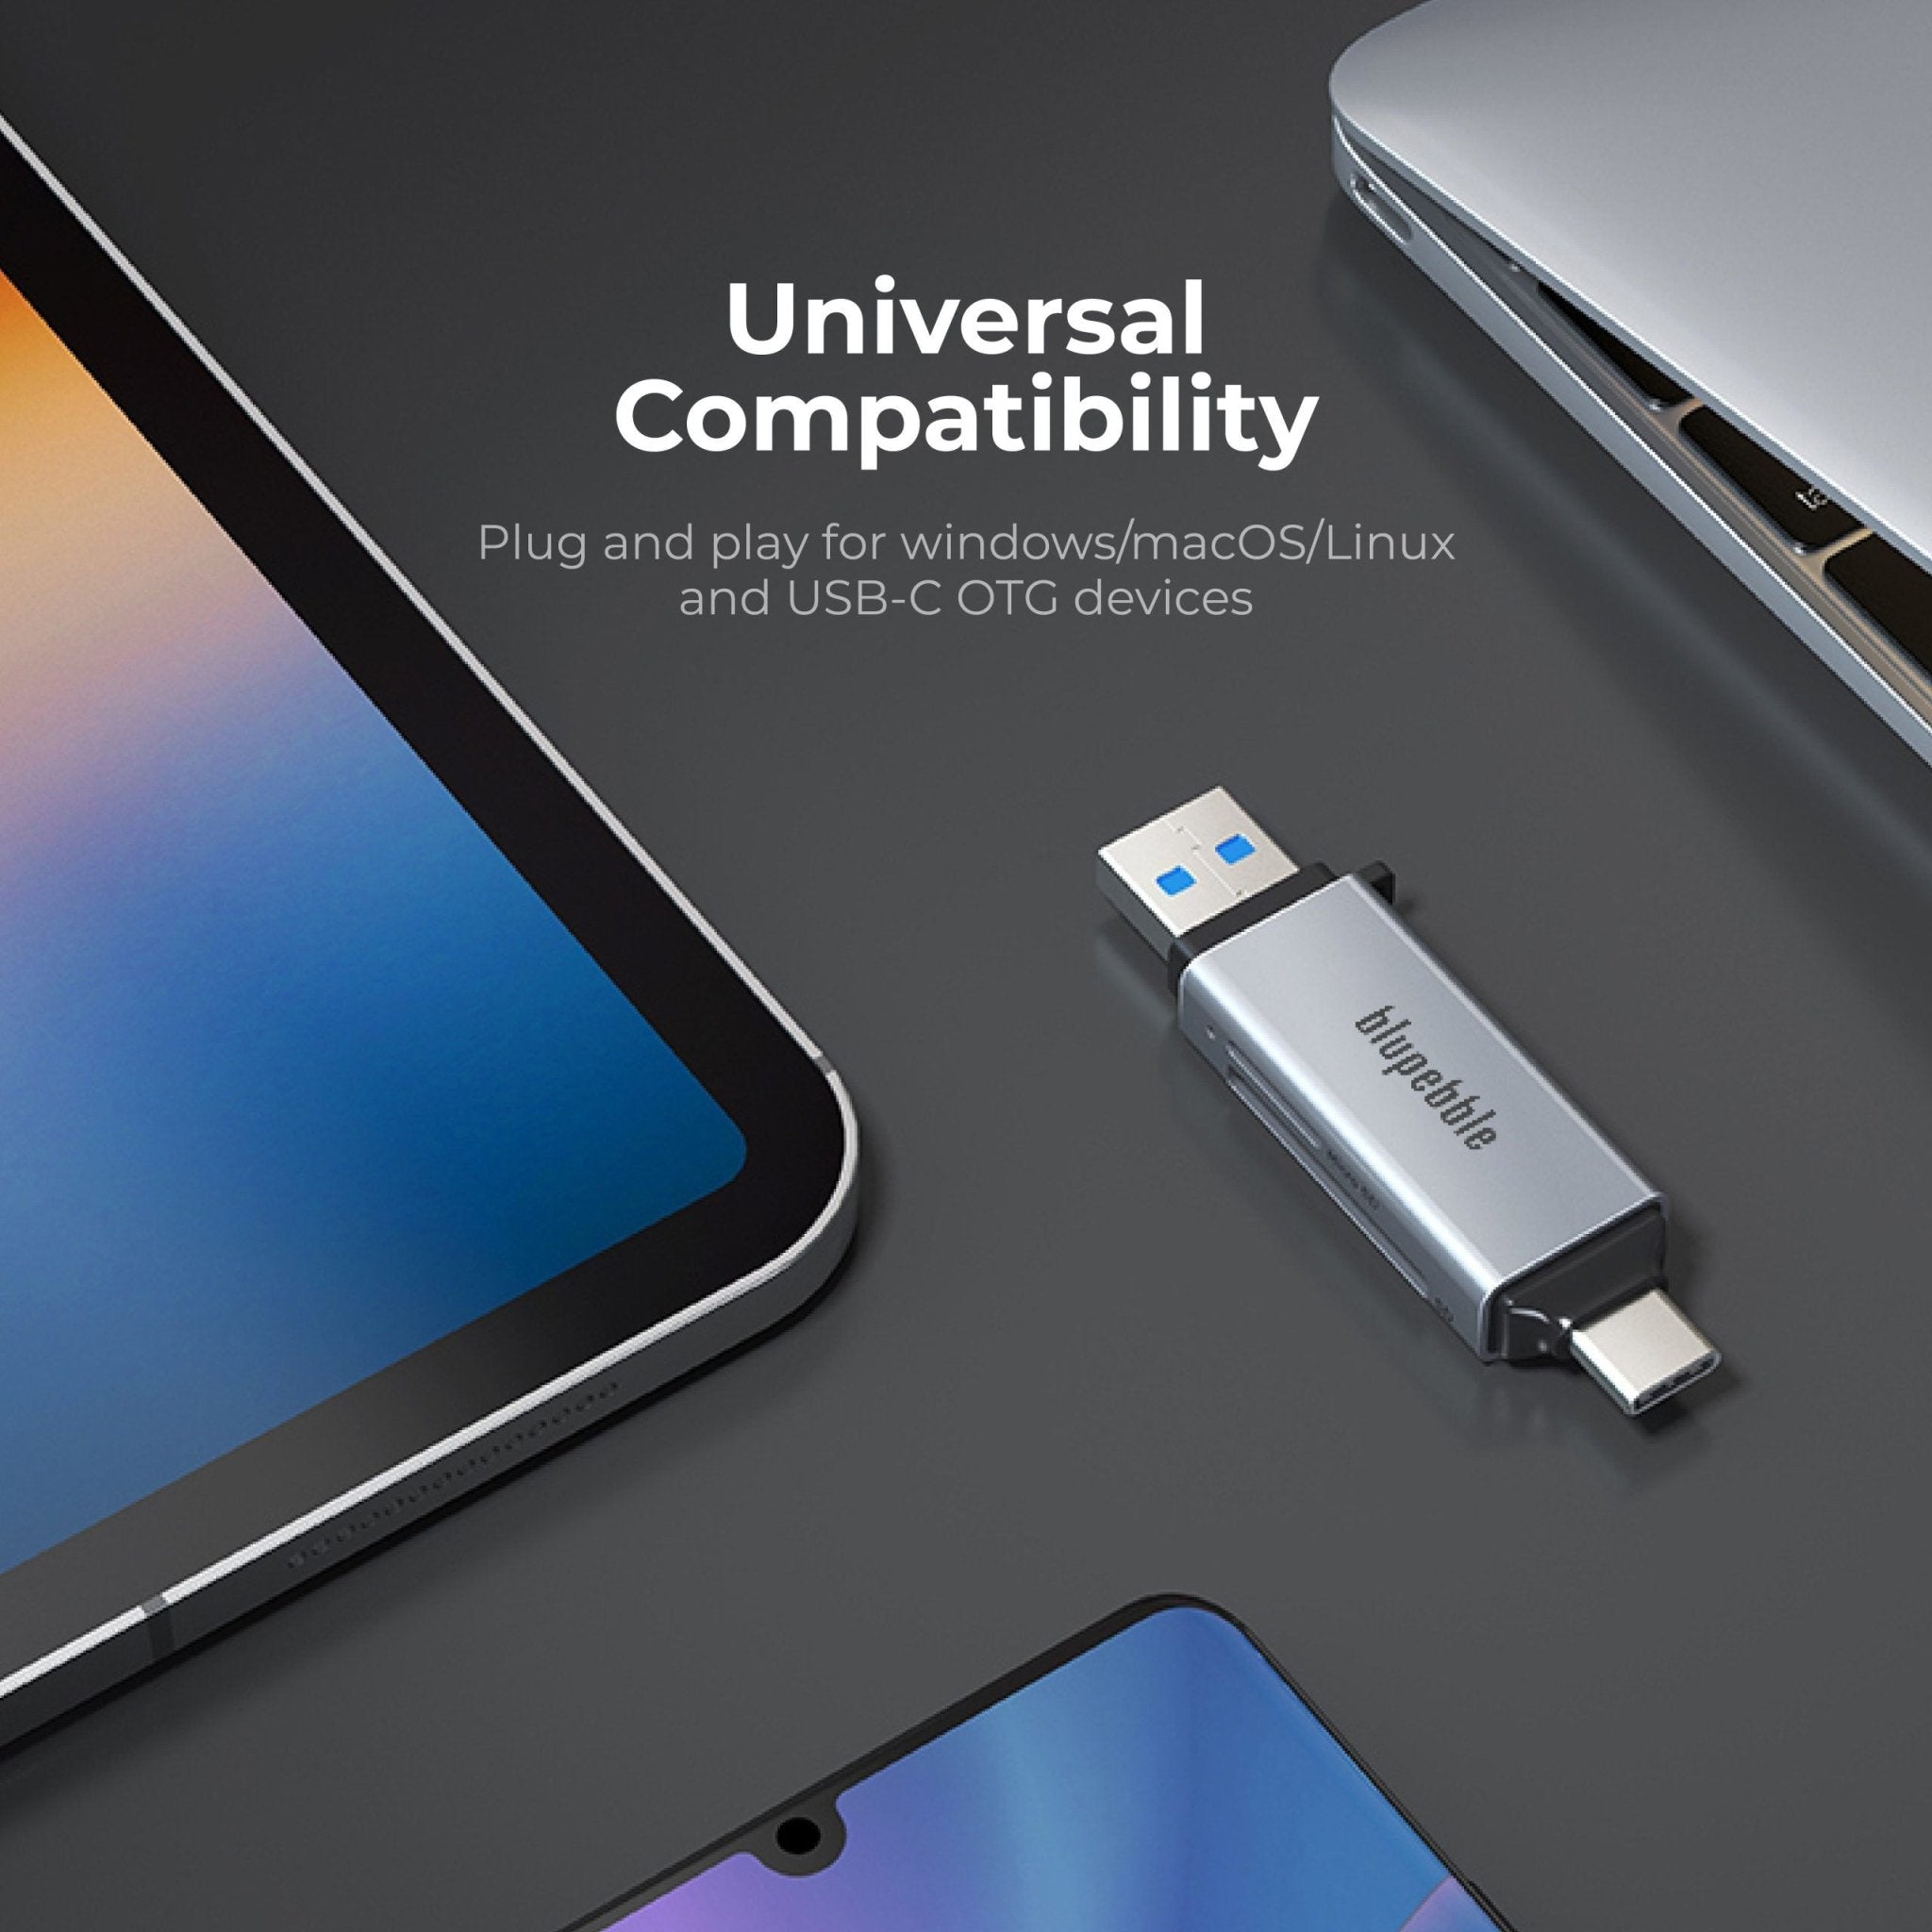 Blupebble 2in 1 USB A+ USB-C Card Reader SD/TF 5Gbps - Gray